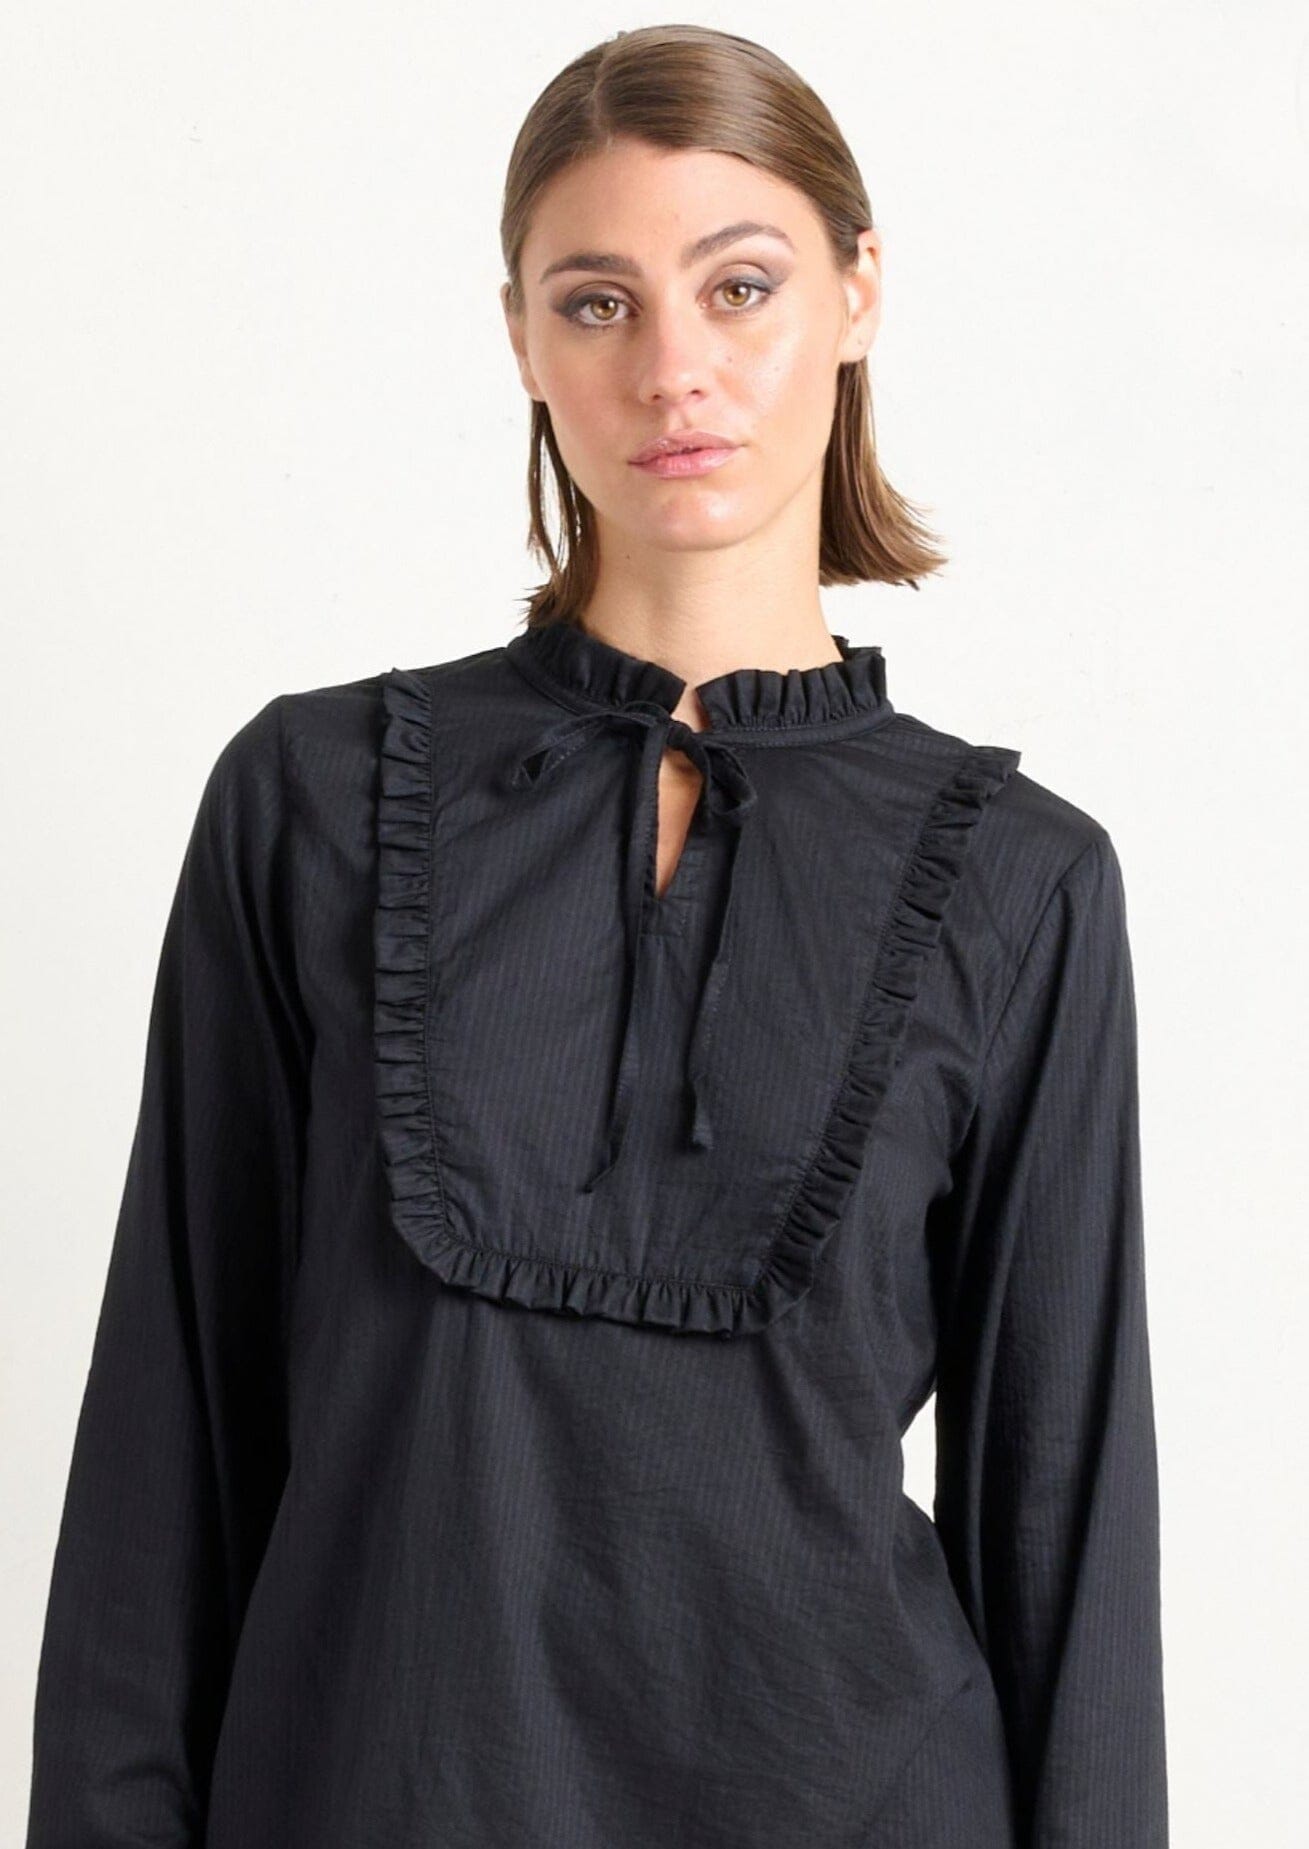 Frilled Tie Blouse Top State of Embrace 